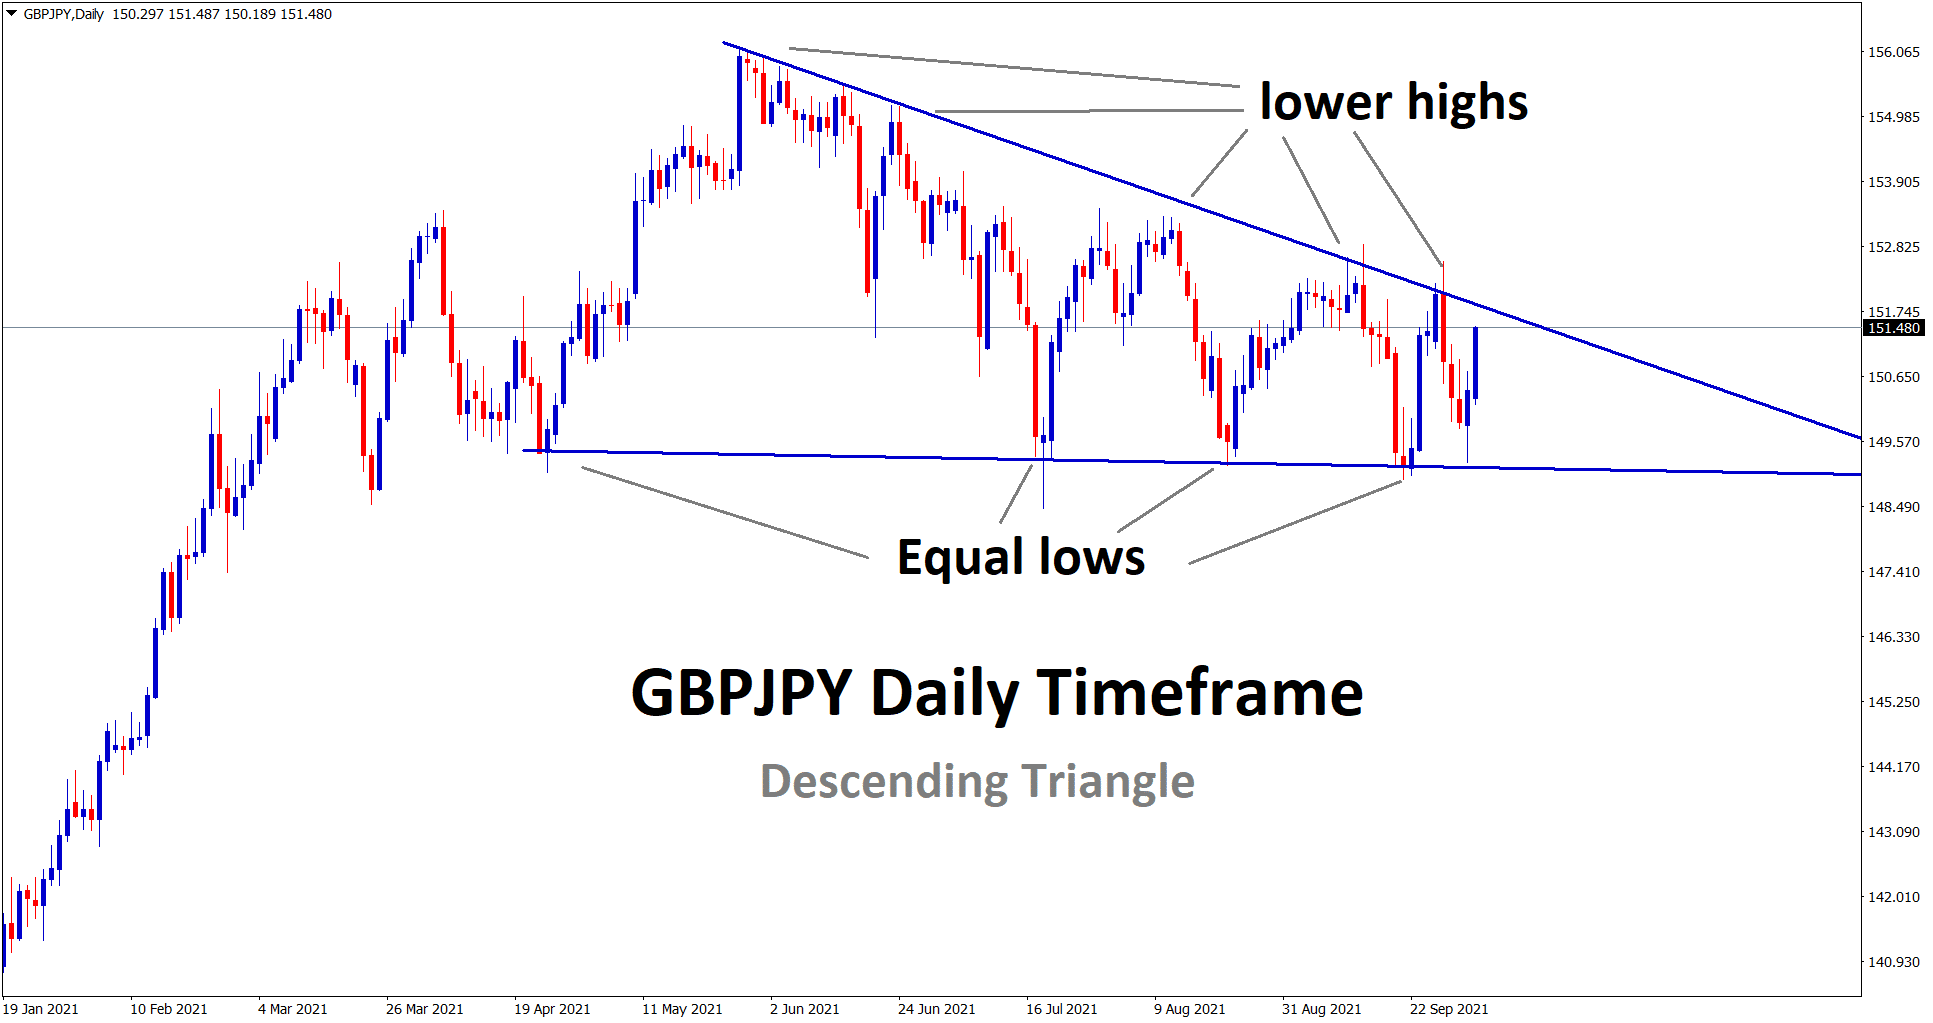 GBPJPY is going to break the descending channel pattern soon wait for the confirmation of breakout